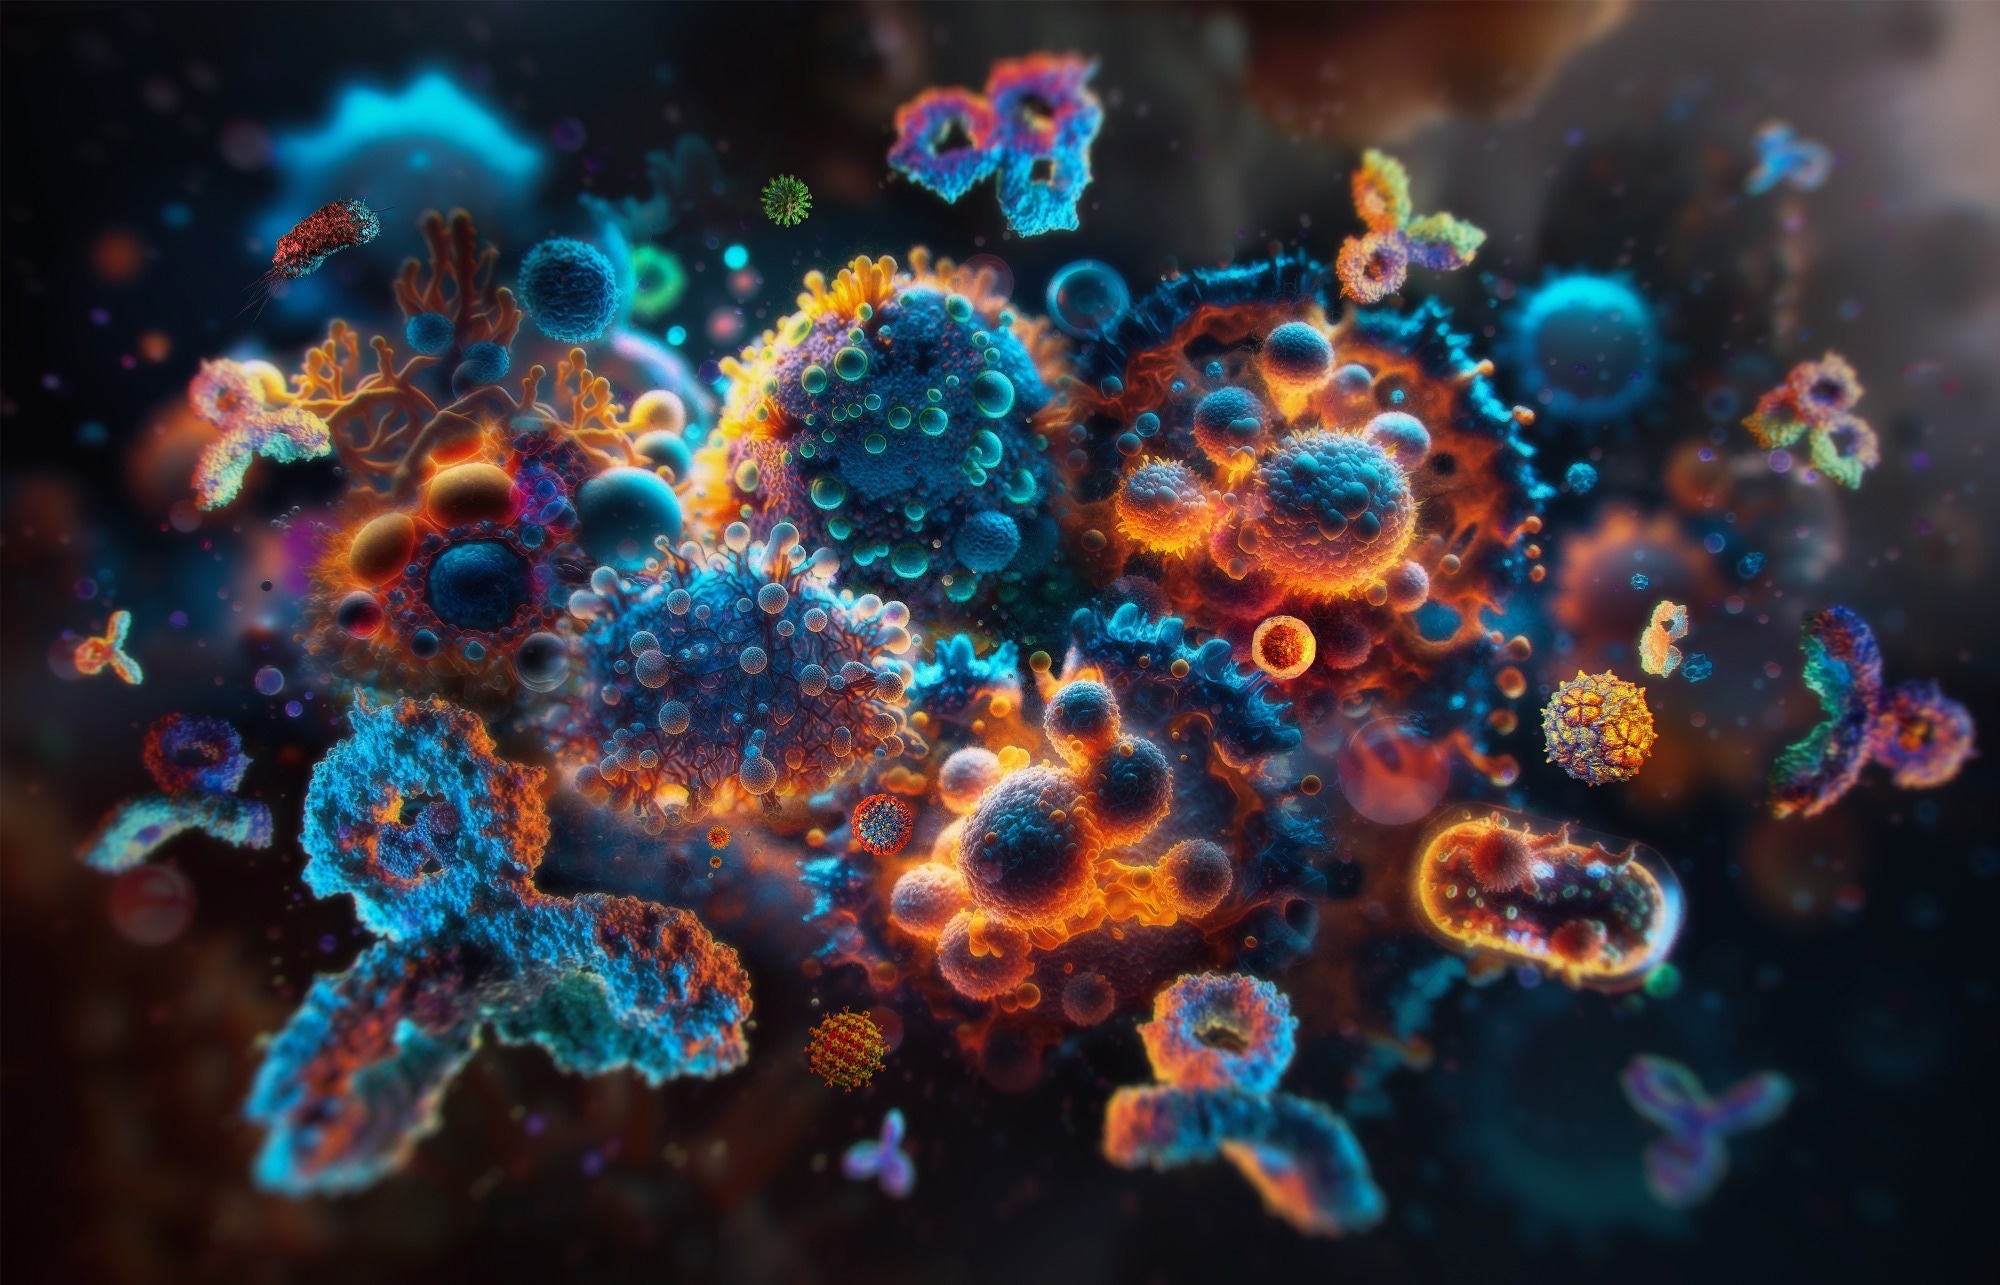 Study: The Structures of Secretory IgA in complex with Streptococcus pyogenes M4 and human CD89 provide insights on mucosal host-pathogen interactions. Image Credit: Corona Borealis Studio / Shutterstock.com